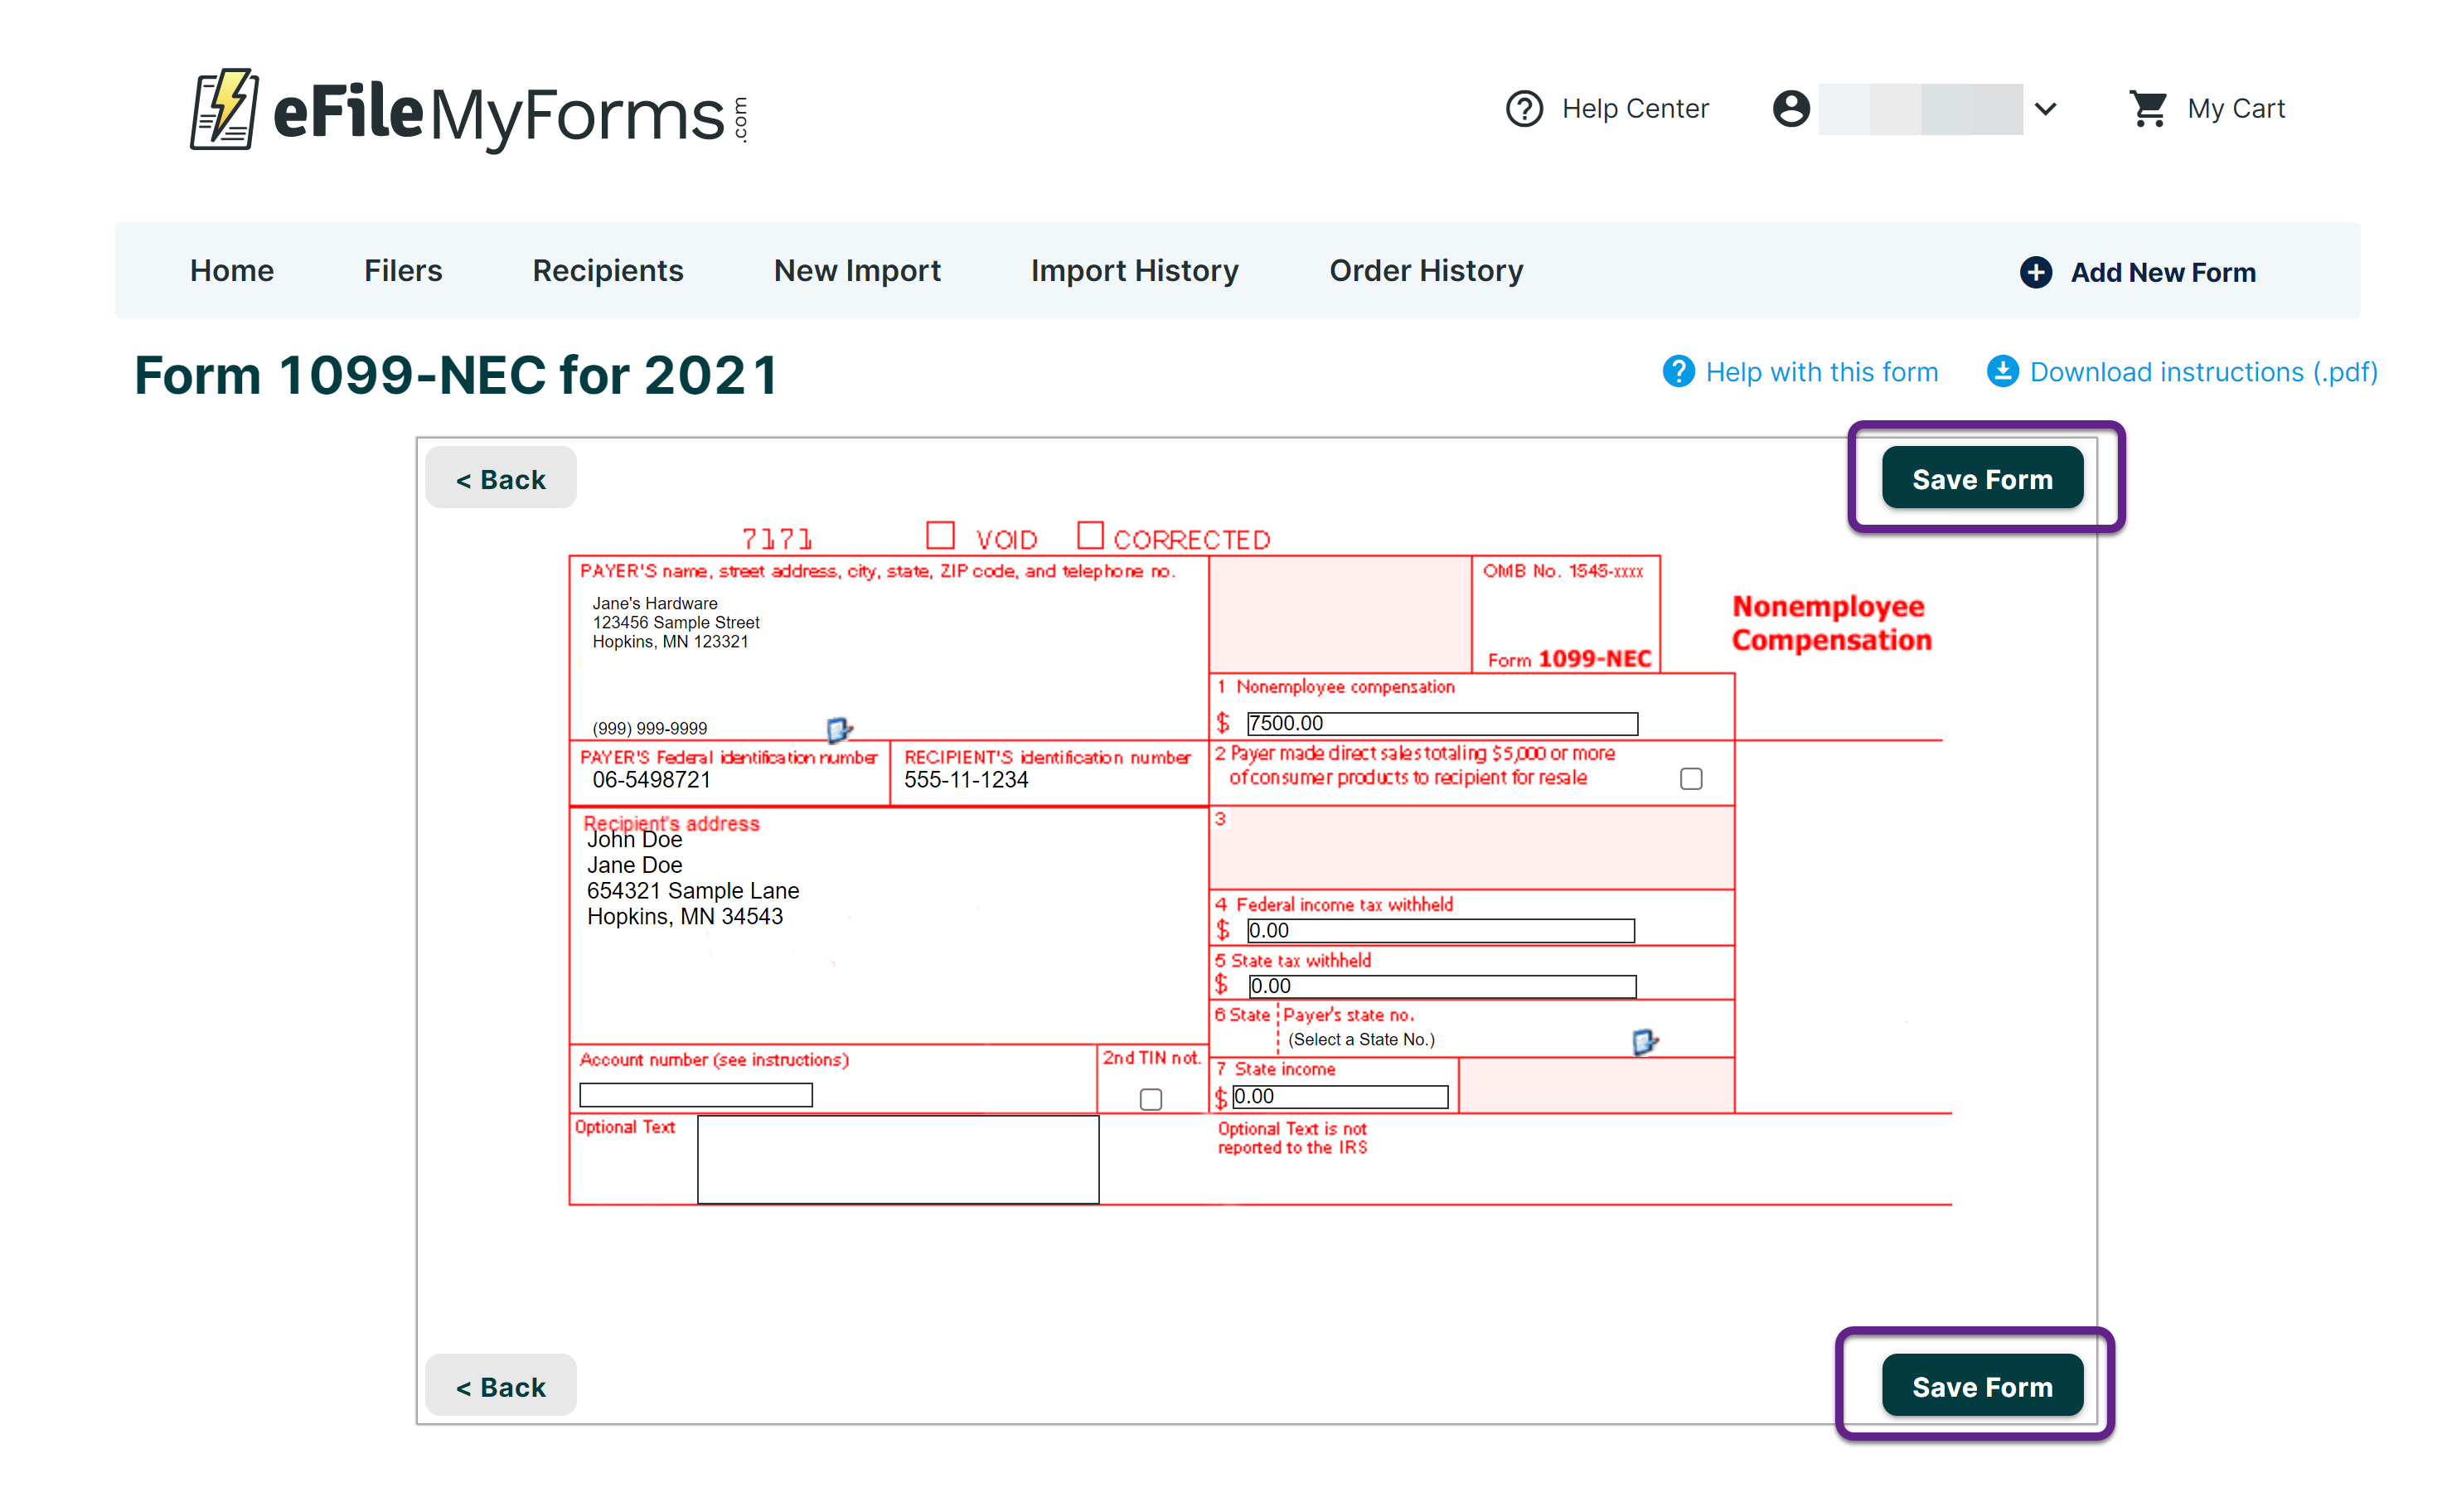 Image of a 1099-NEC for 2021 form with a callout on the Save Form button.